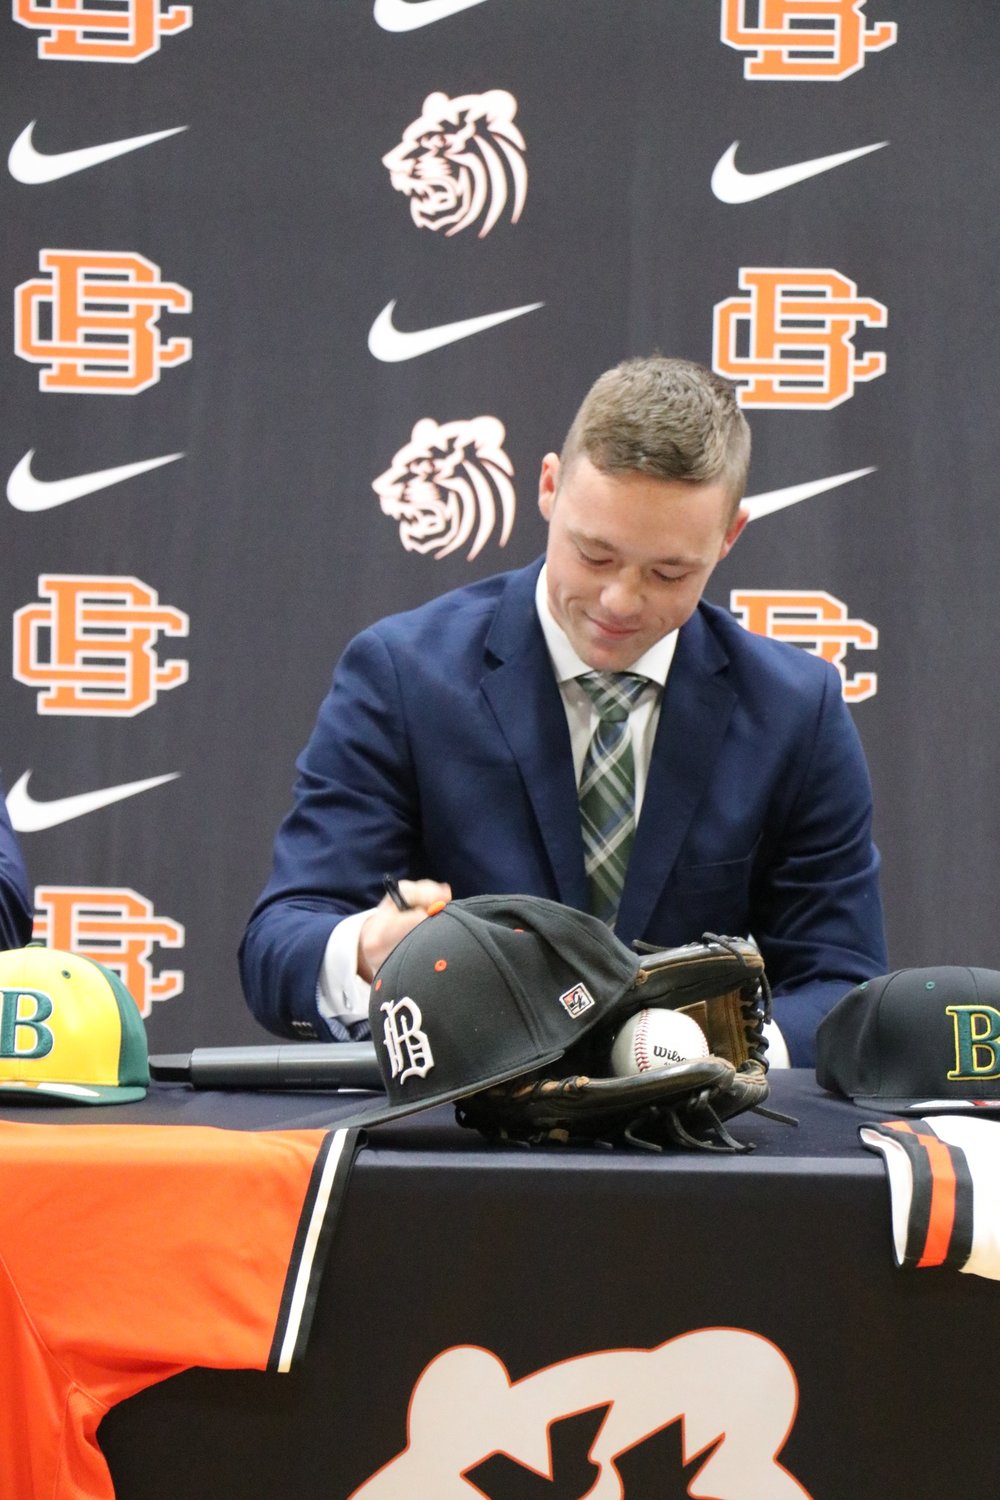 Trevor Murphy puts pen to paper and cements his commitment to the Bishop State Wildcat baseball program during a signing ceremony at the high school Thursday morning. The Wildcats set multiple program records last season and Murphy will look to factor into the 2024 lineup.